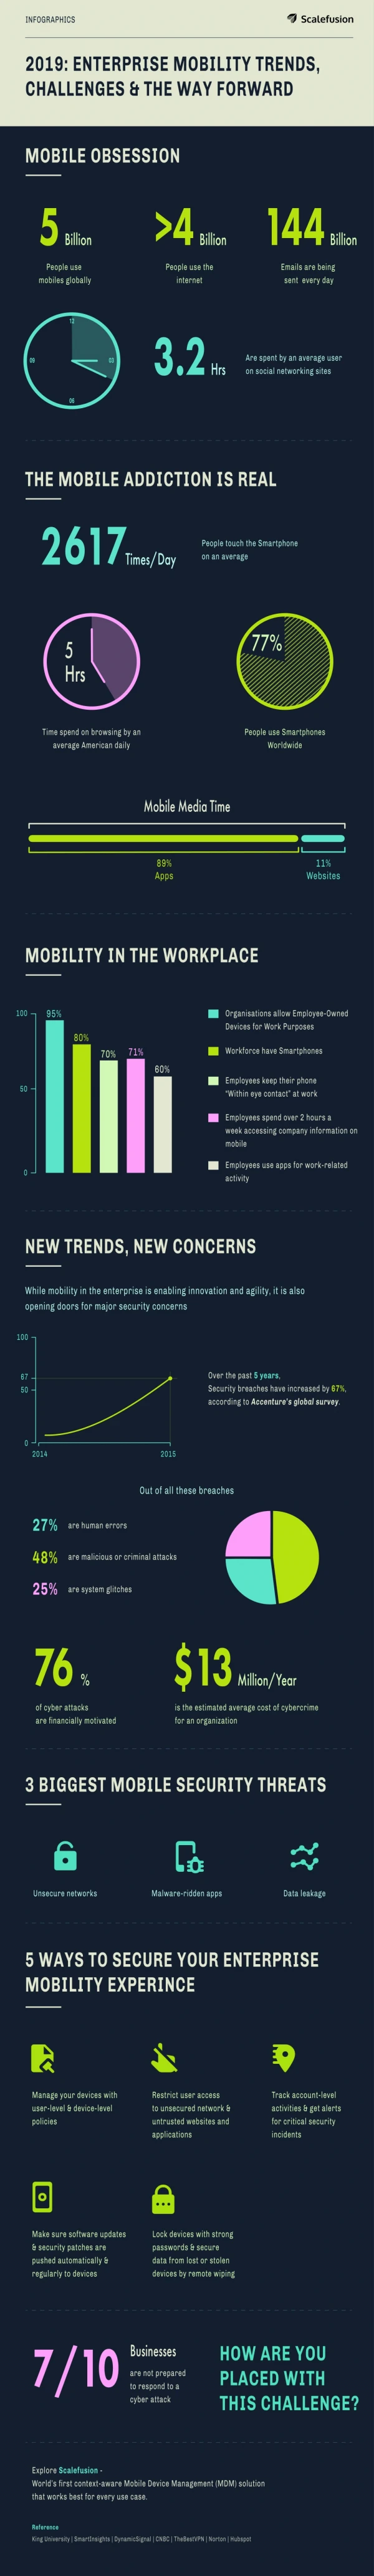 [Infographic] 2019: ENTERPRISE MOBILITY TRENDS, CHALLENGES & THE WAY FORWARD